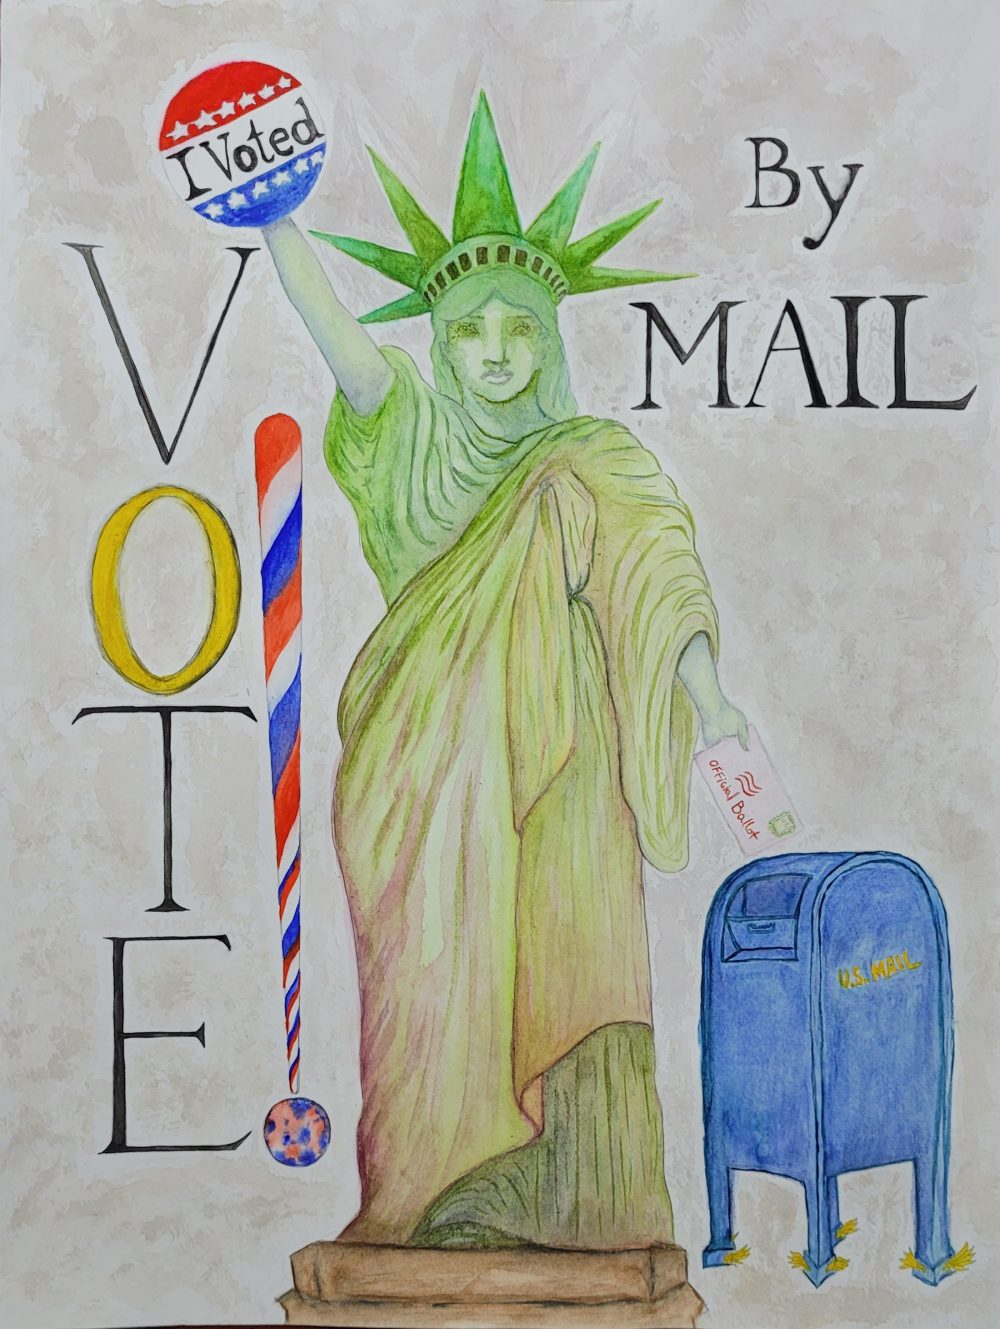 A watercolor portrait of Lady Liberty voting by mail.